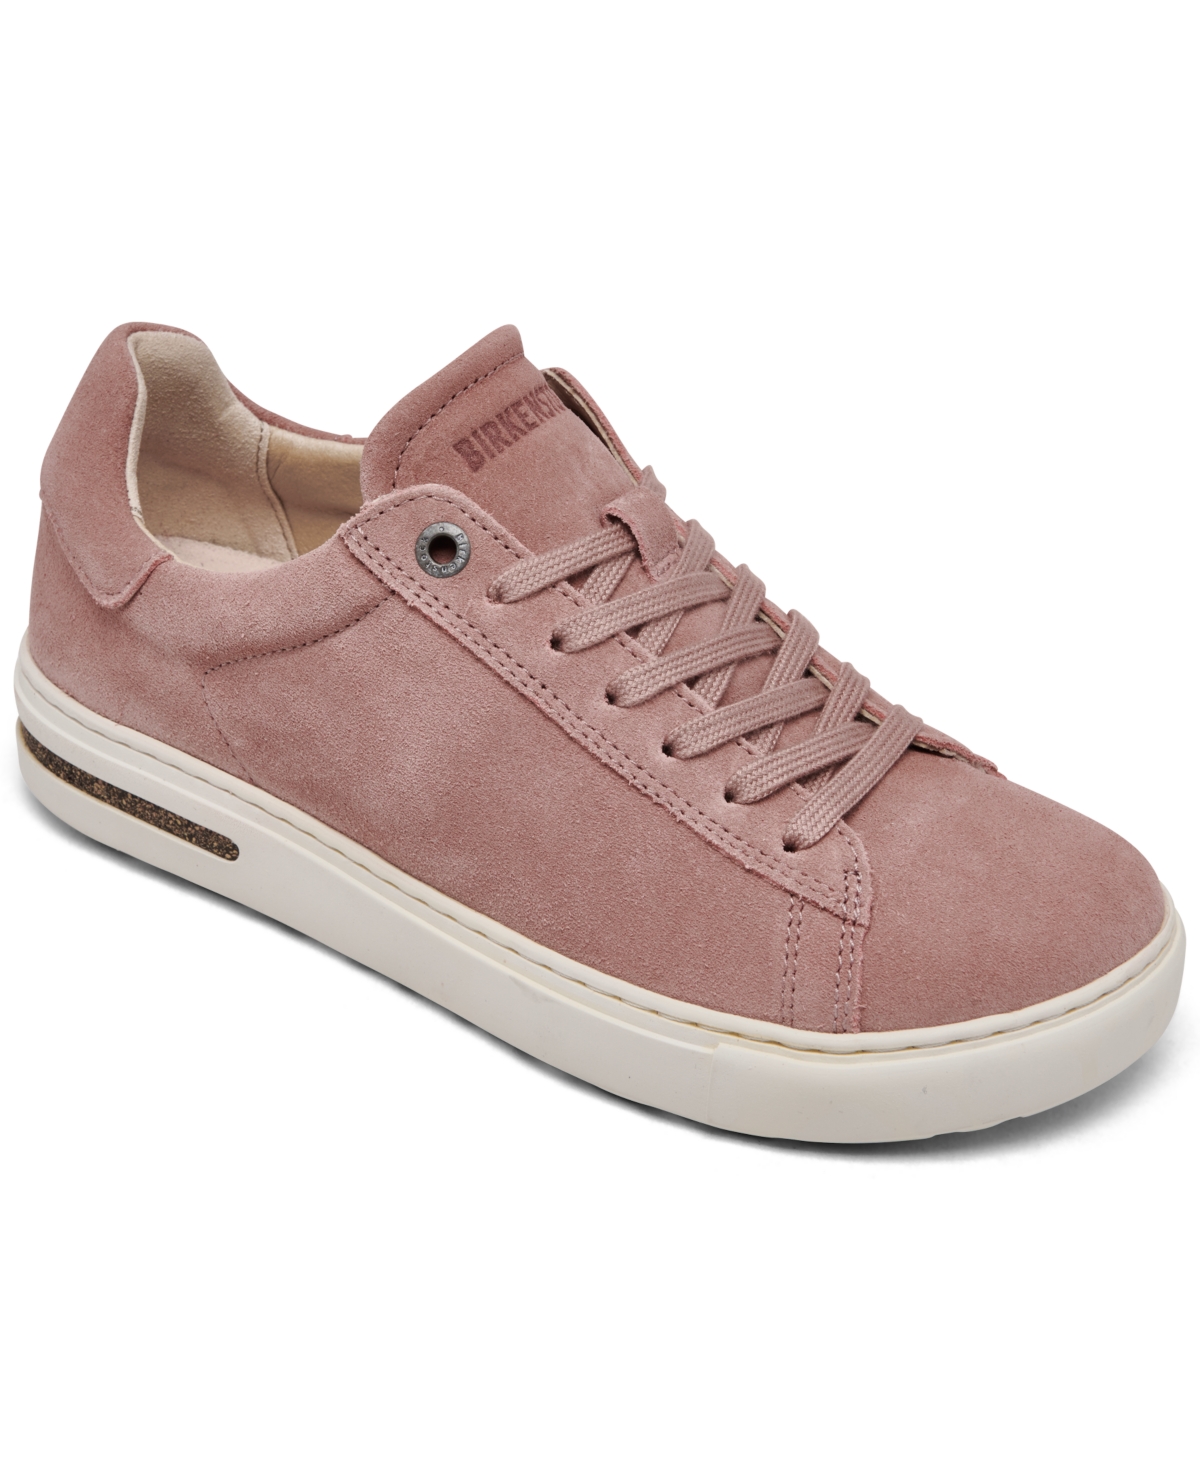 Women's Bend Low Suede Leather Casual Sneakers from Finish Line - Pink Clay